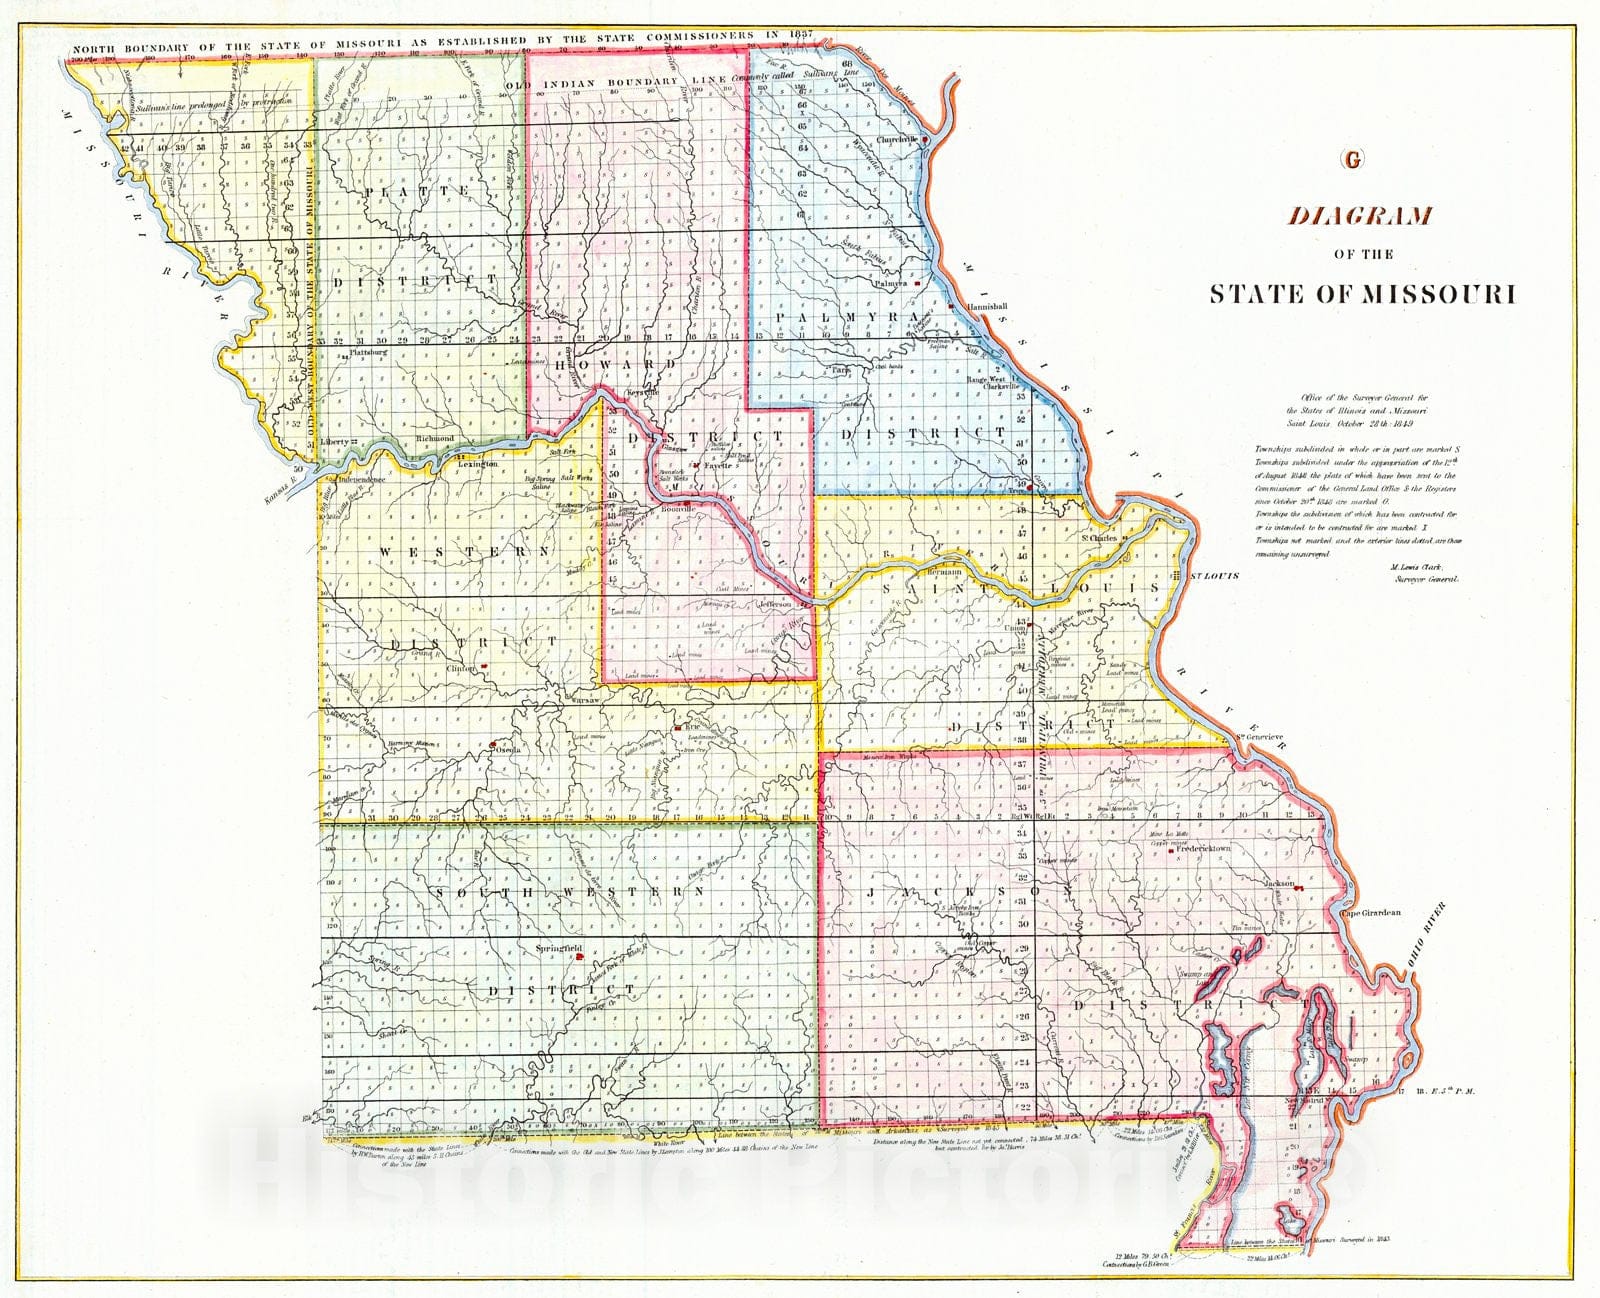 Historic Map : 1849 Diagram of the State of Missouri : Vintage Wall Art